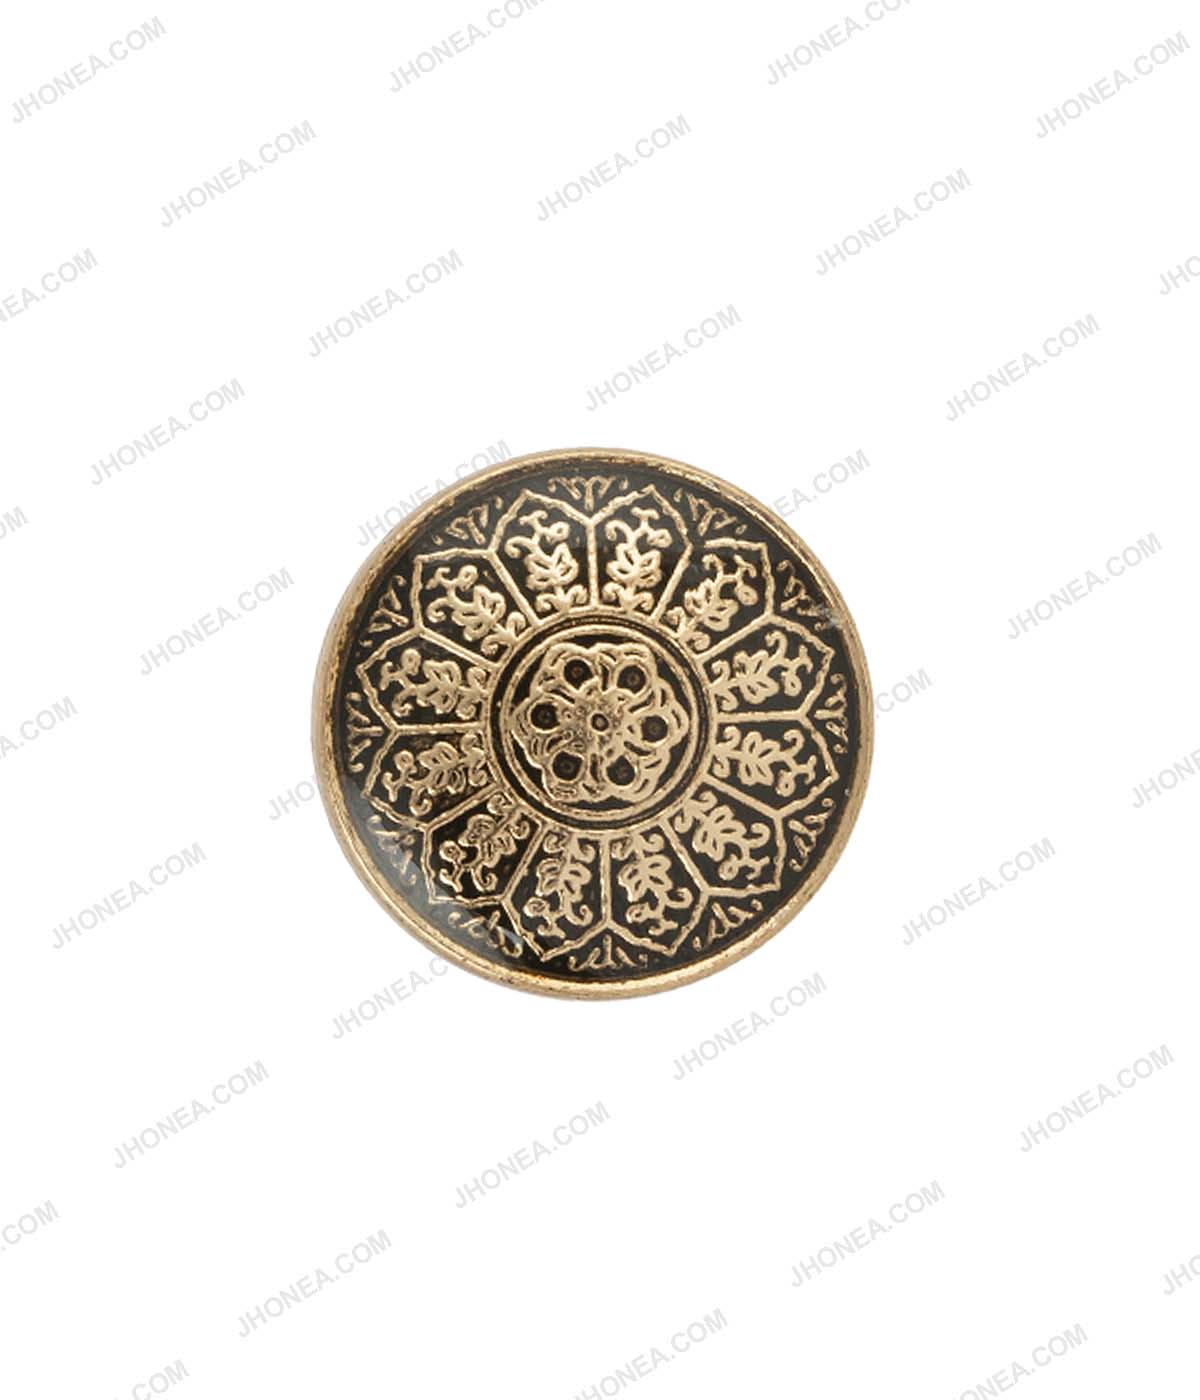 Shiny Antique Gold Intricate Design Lamination Metal Buttons